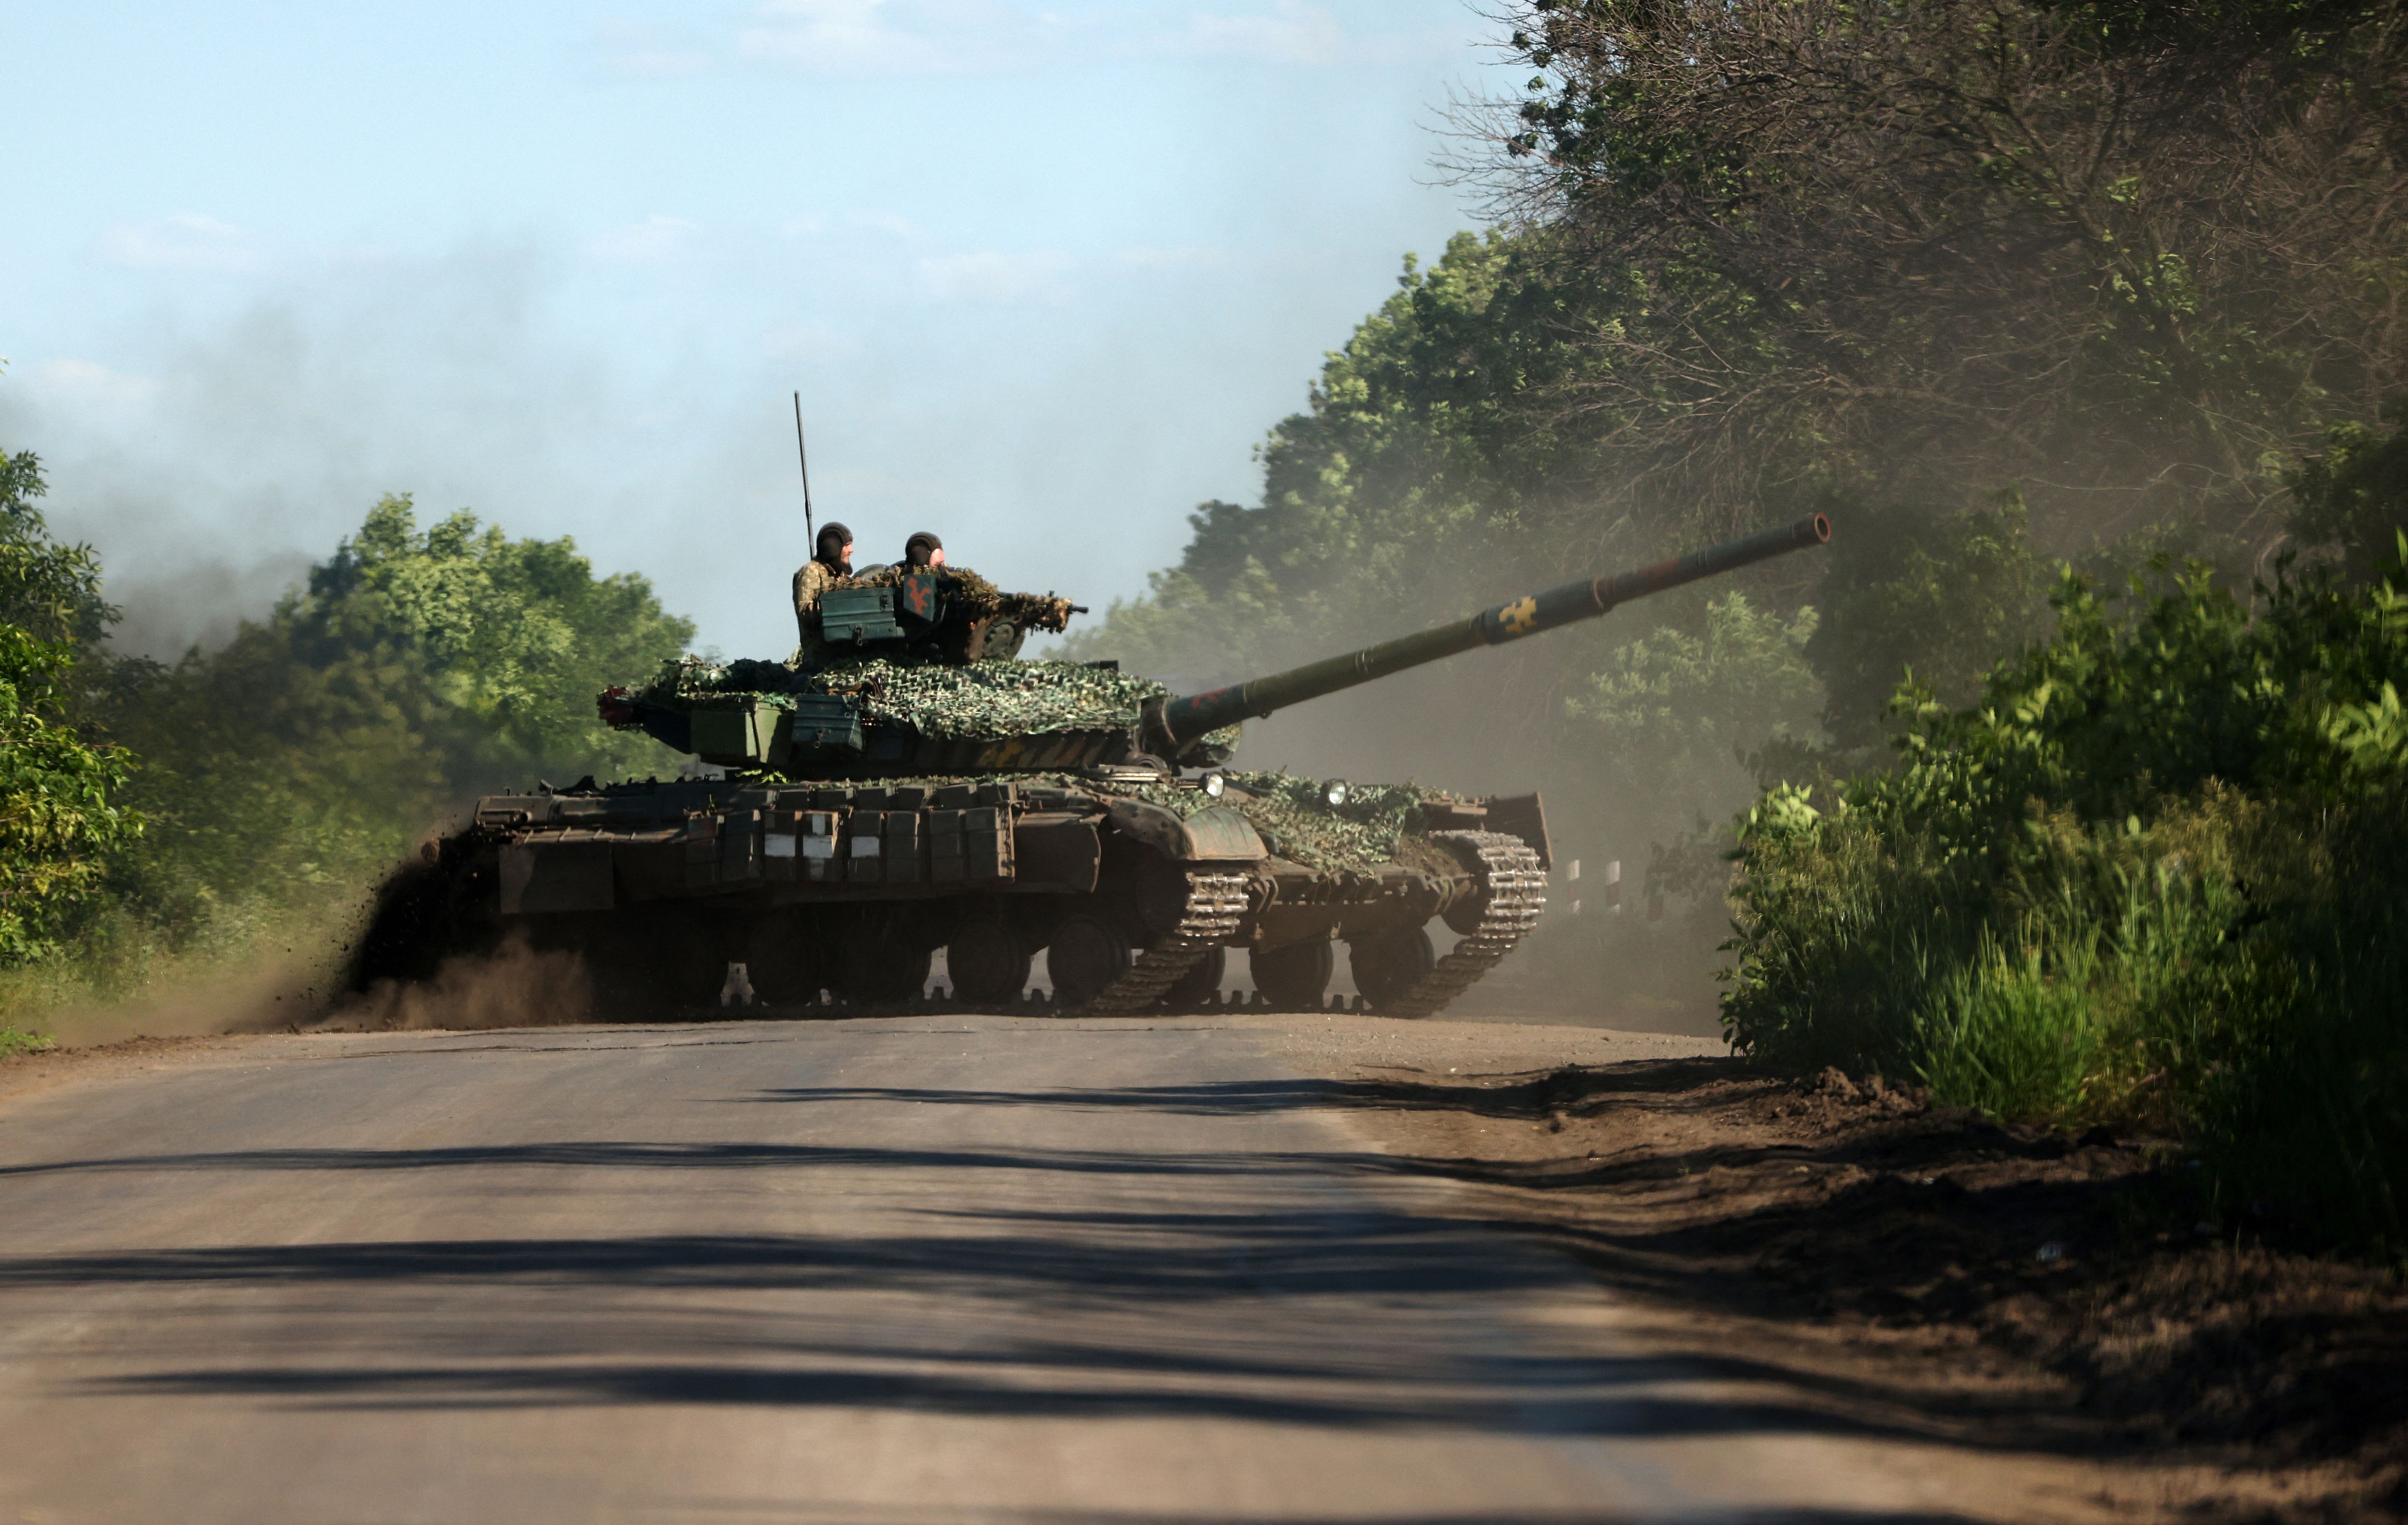 Ukraine Has Caught Up With Russia's Tank Numbers, Data Signal - Bloomberg